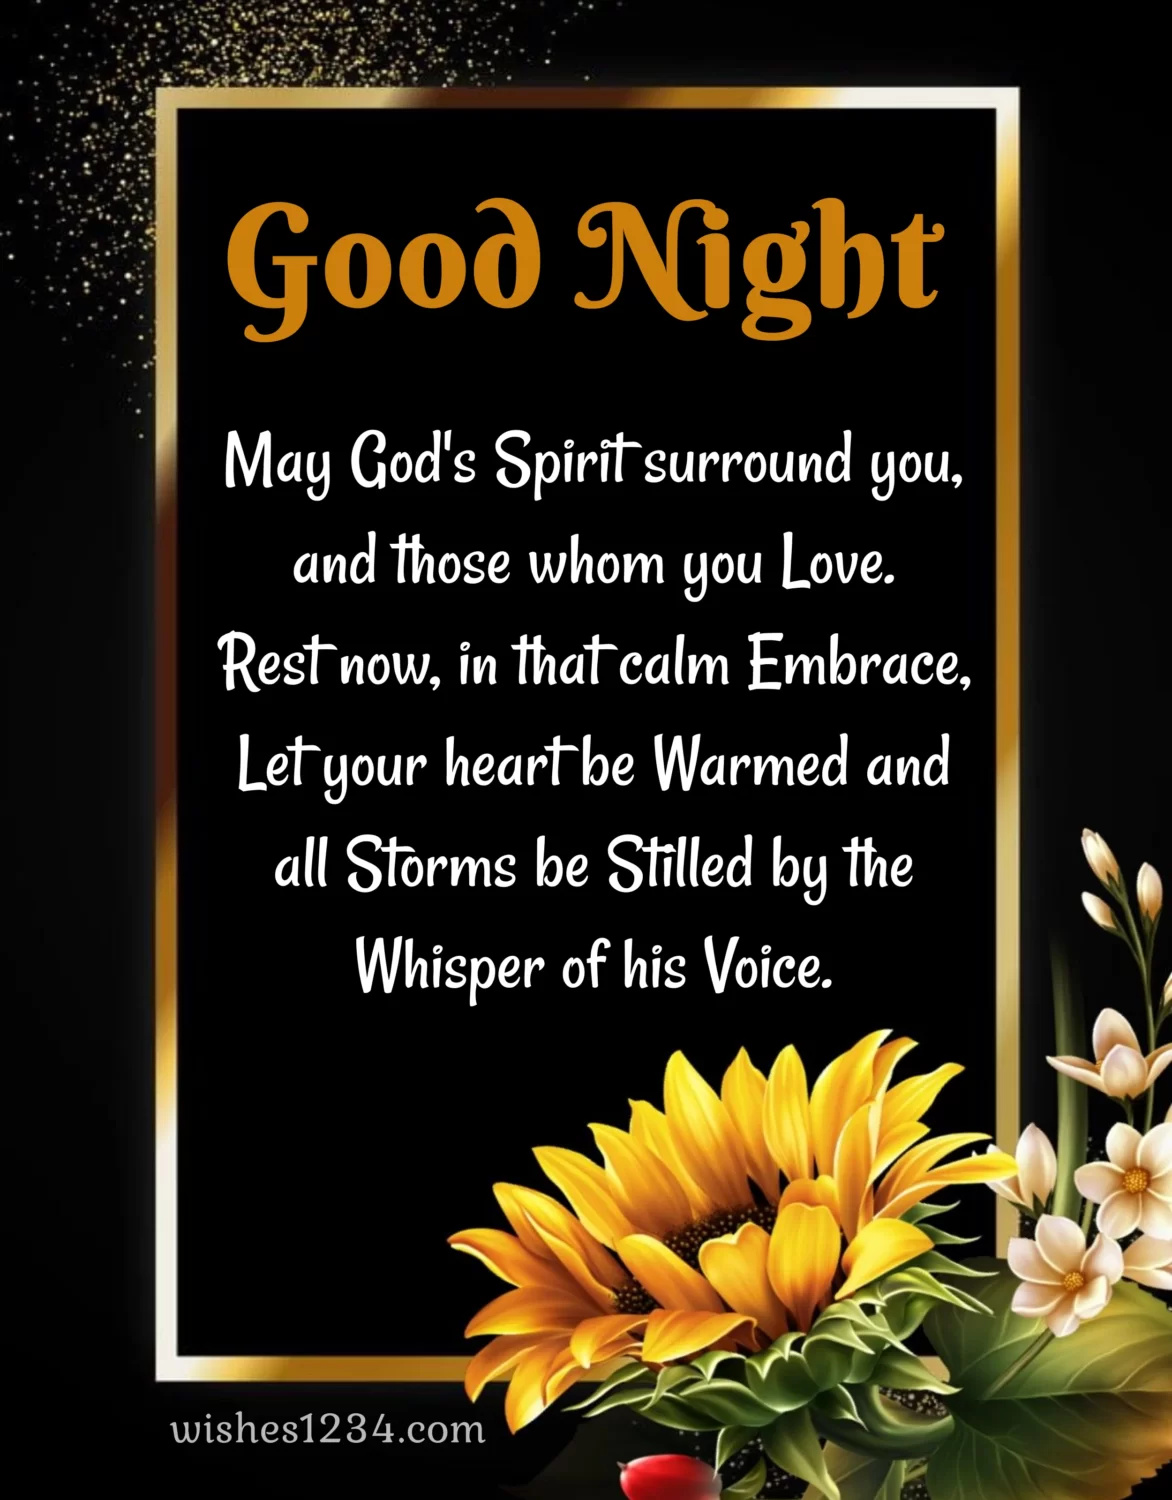 Good night wishes with golden border and sunflower background, Good Night Blessings.